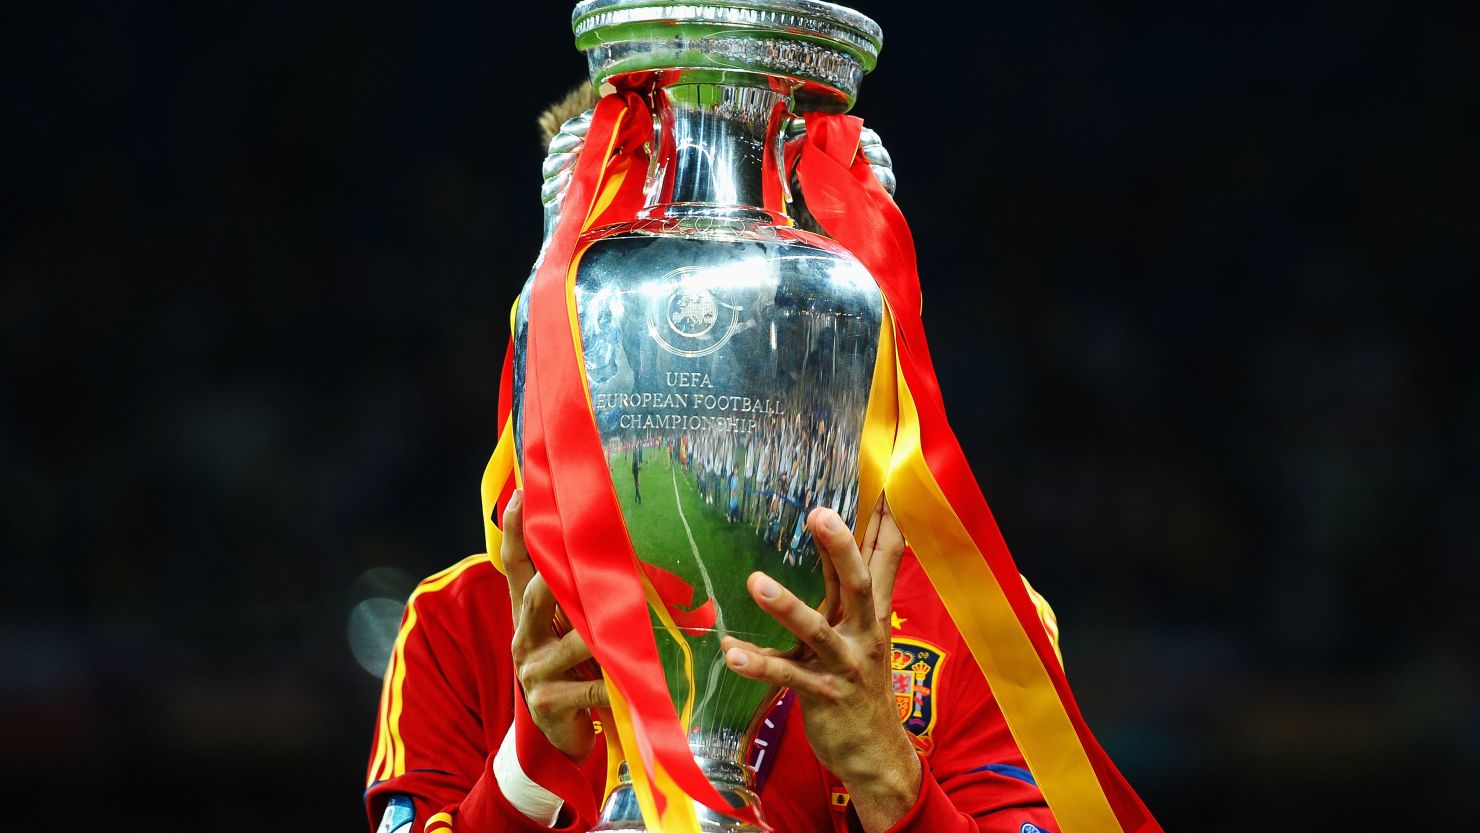 Spain are the reigning European champions, having lifted the trophy at the two previous tournaments